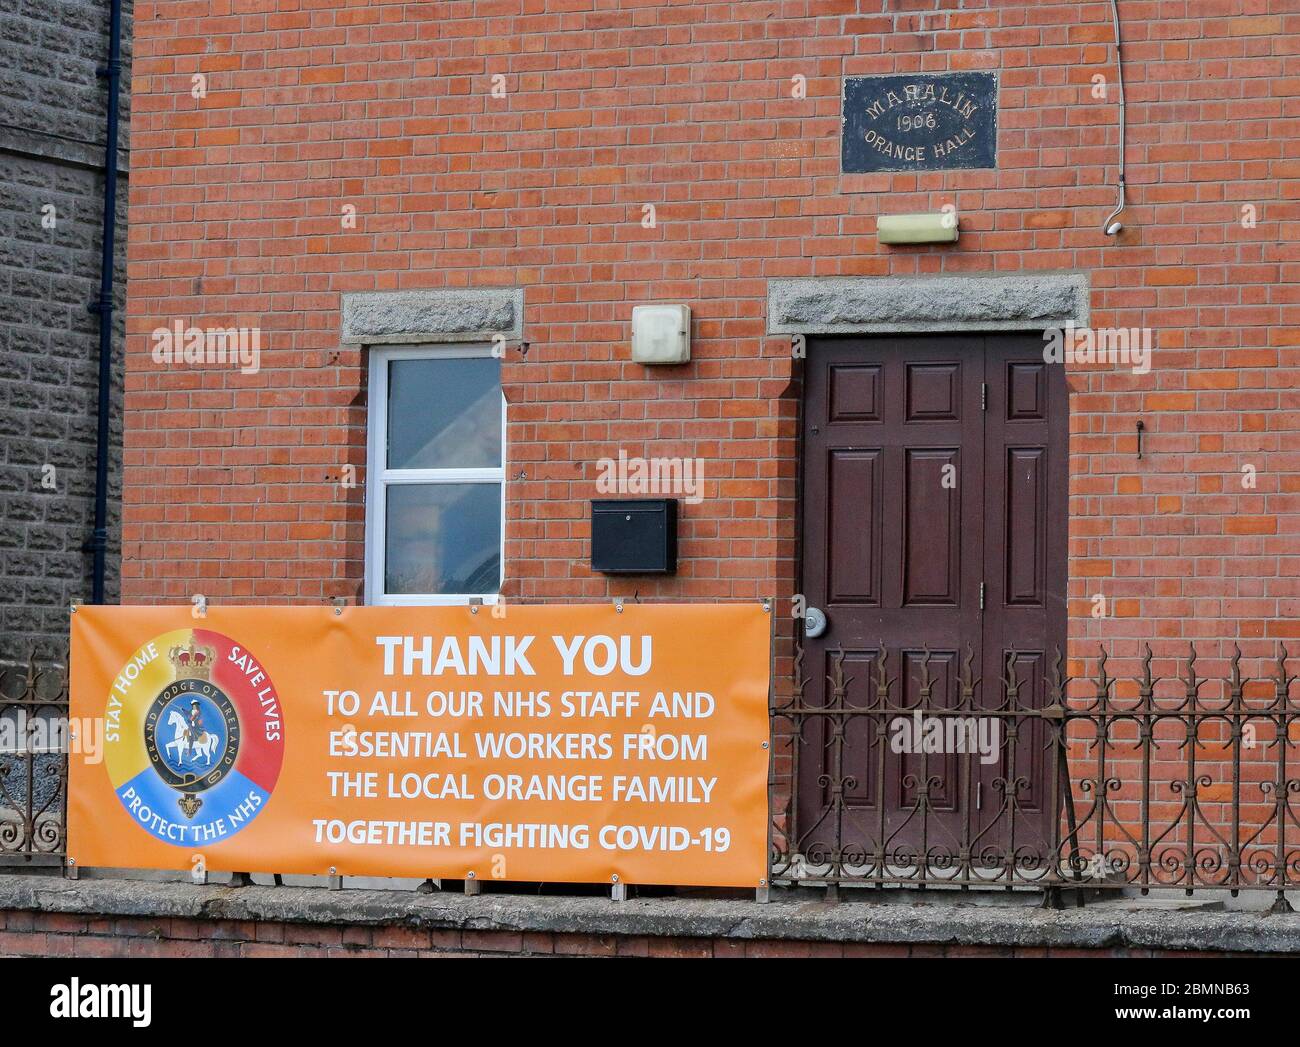 Magheralin, County Armagh, Northern Ireland. 10 May 2020. UK weather - cooler and breezy in the north-easterly wind but a very pelasant spring day nonetheless. NHS and essential workers "Thank You" banner outside the local orange lodge hall.  "ThankCredit: CAZIMB/Alamy Live News. Stock Photo